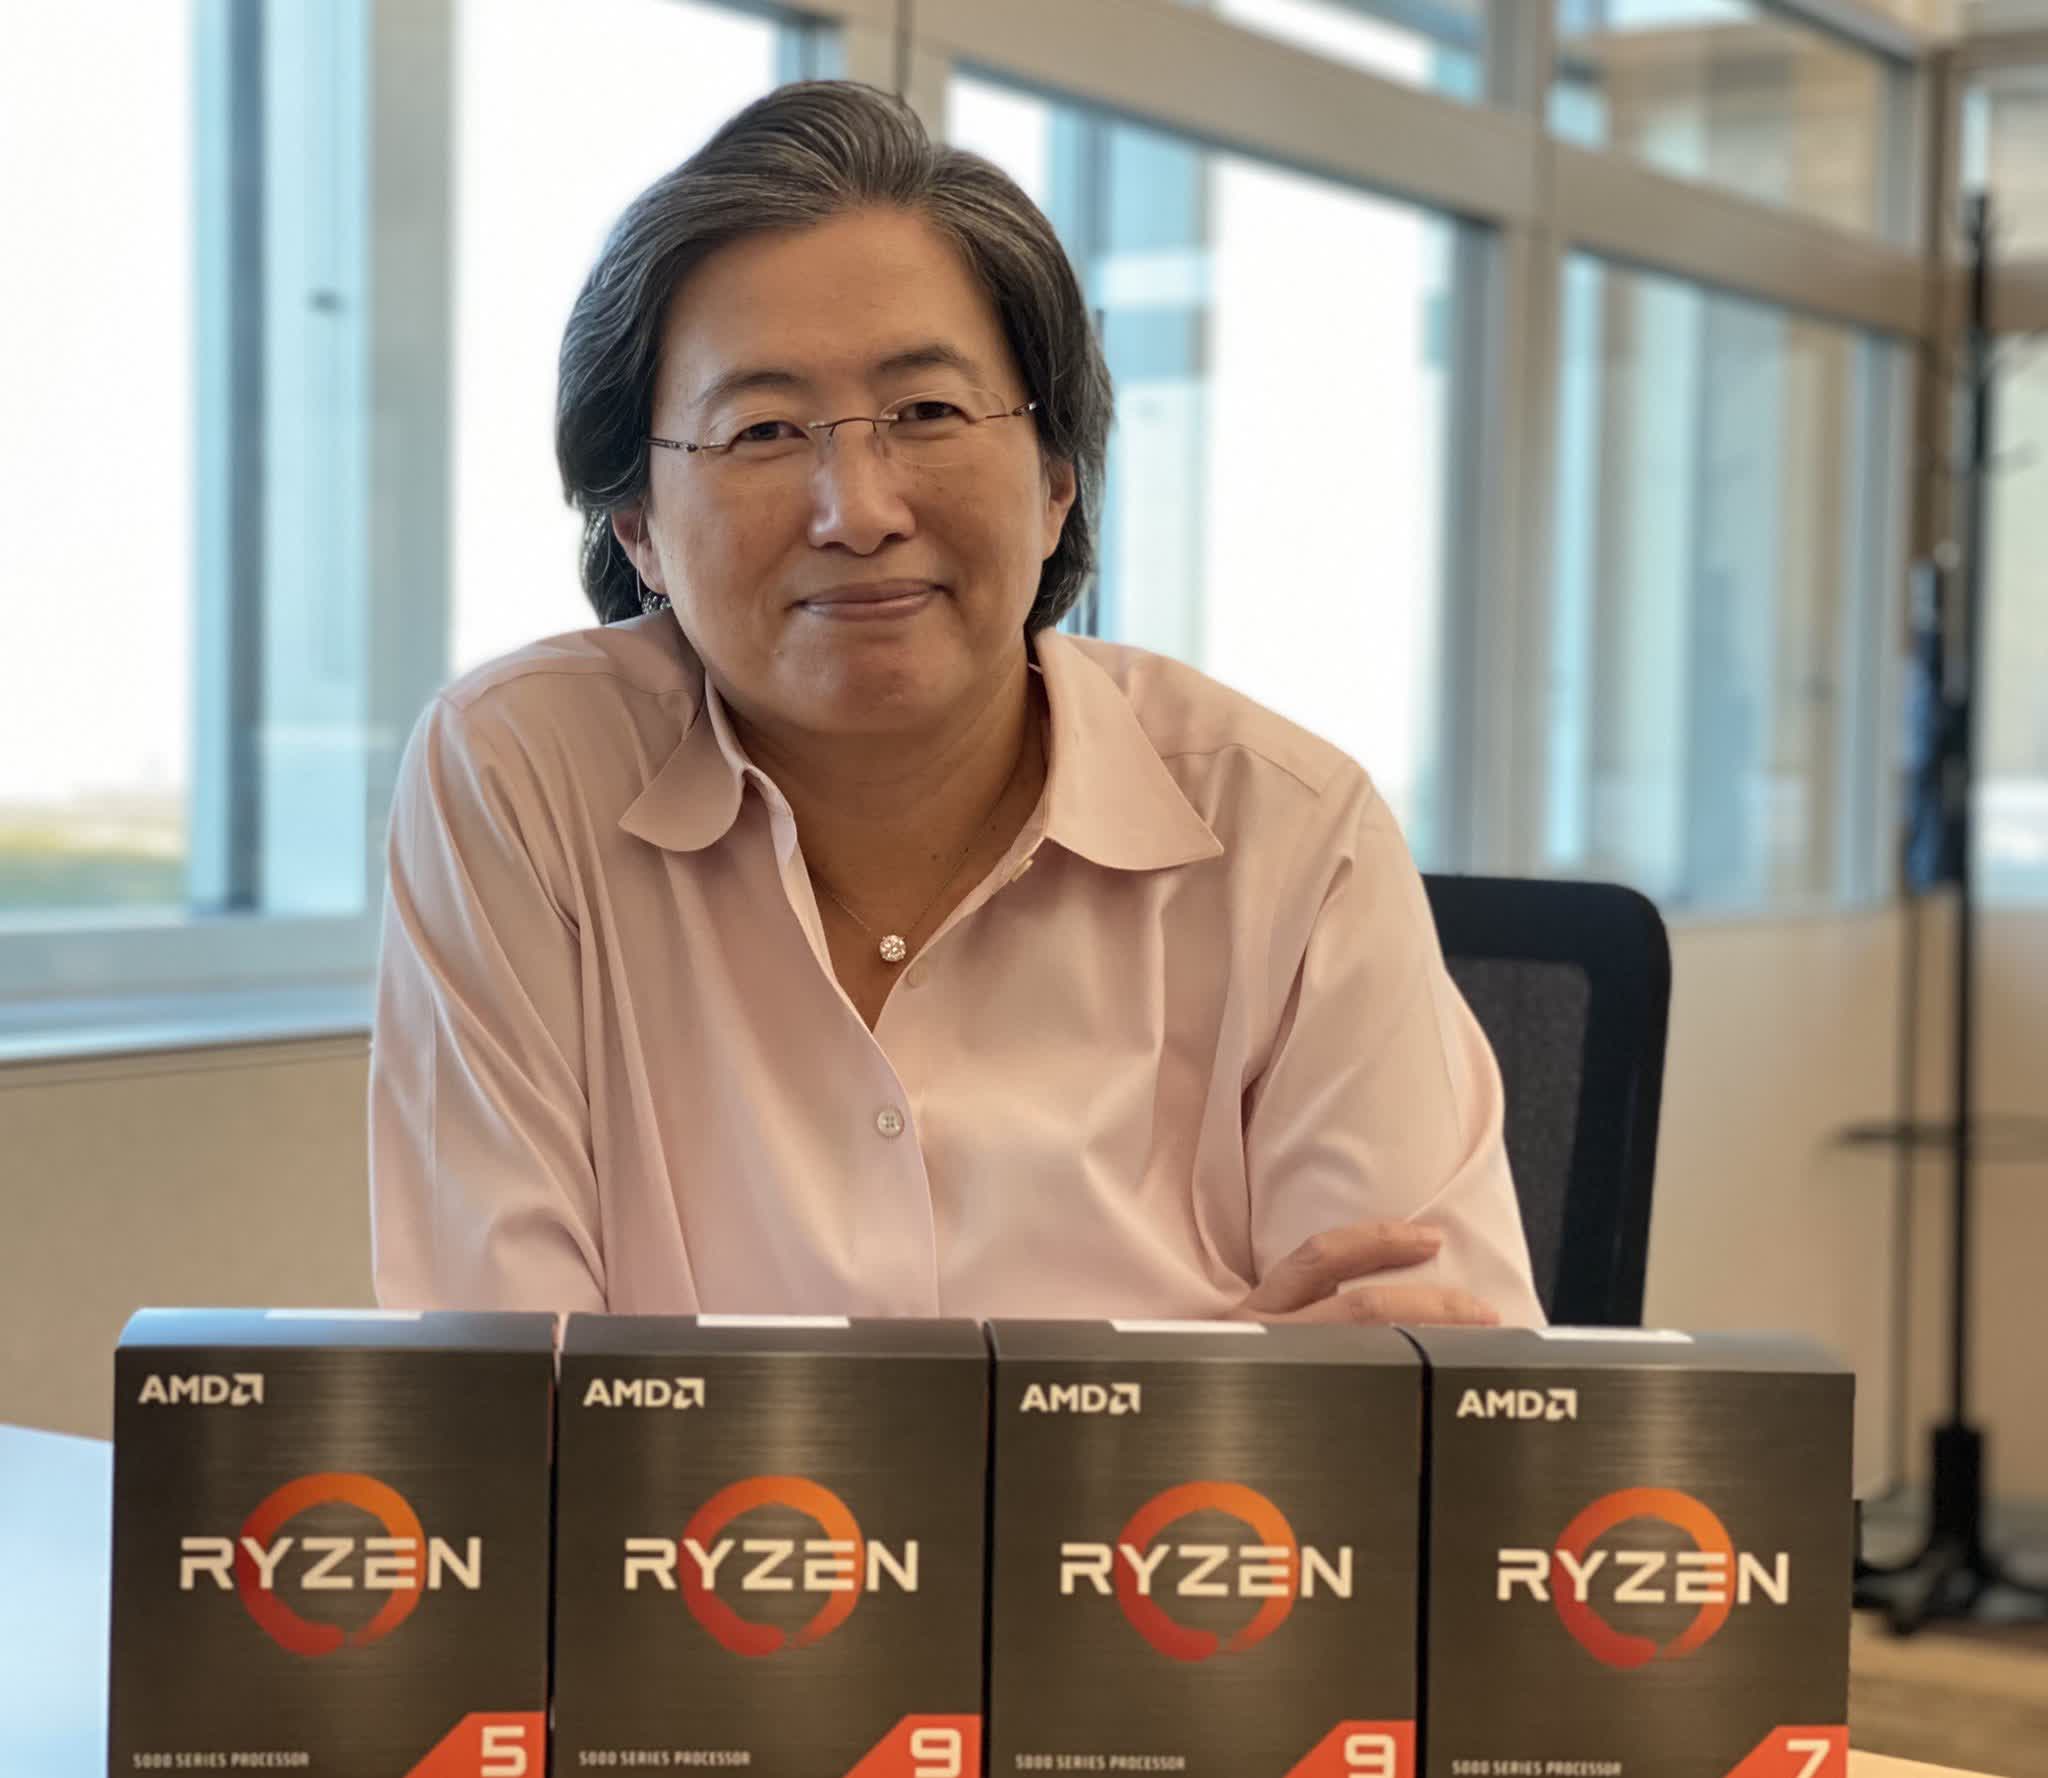 AMD said to be readying Ryzen 5 5500, 5600 and Ryzen 7 5700X CPUs to reduce Alder Lake's appeal